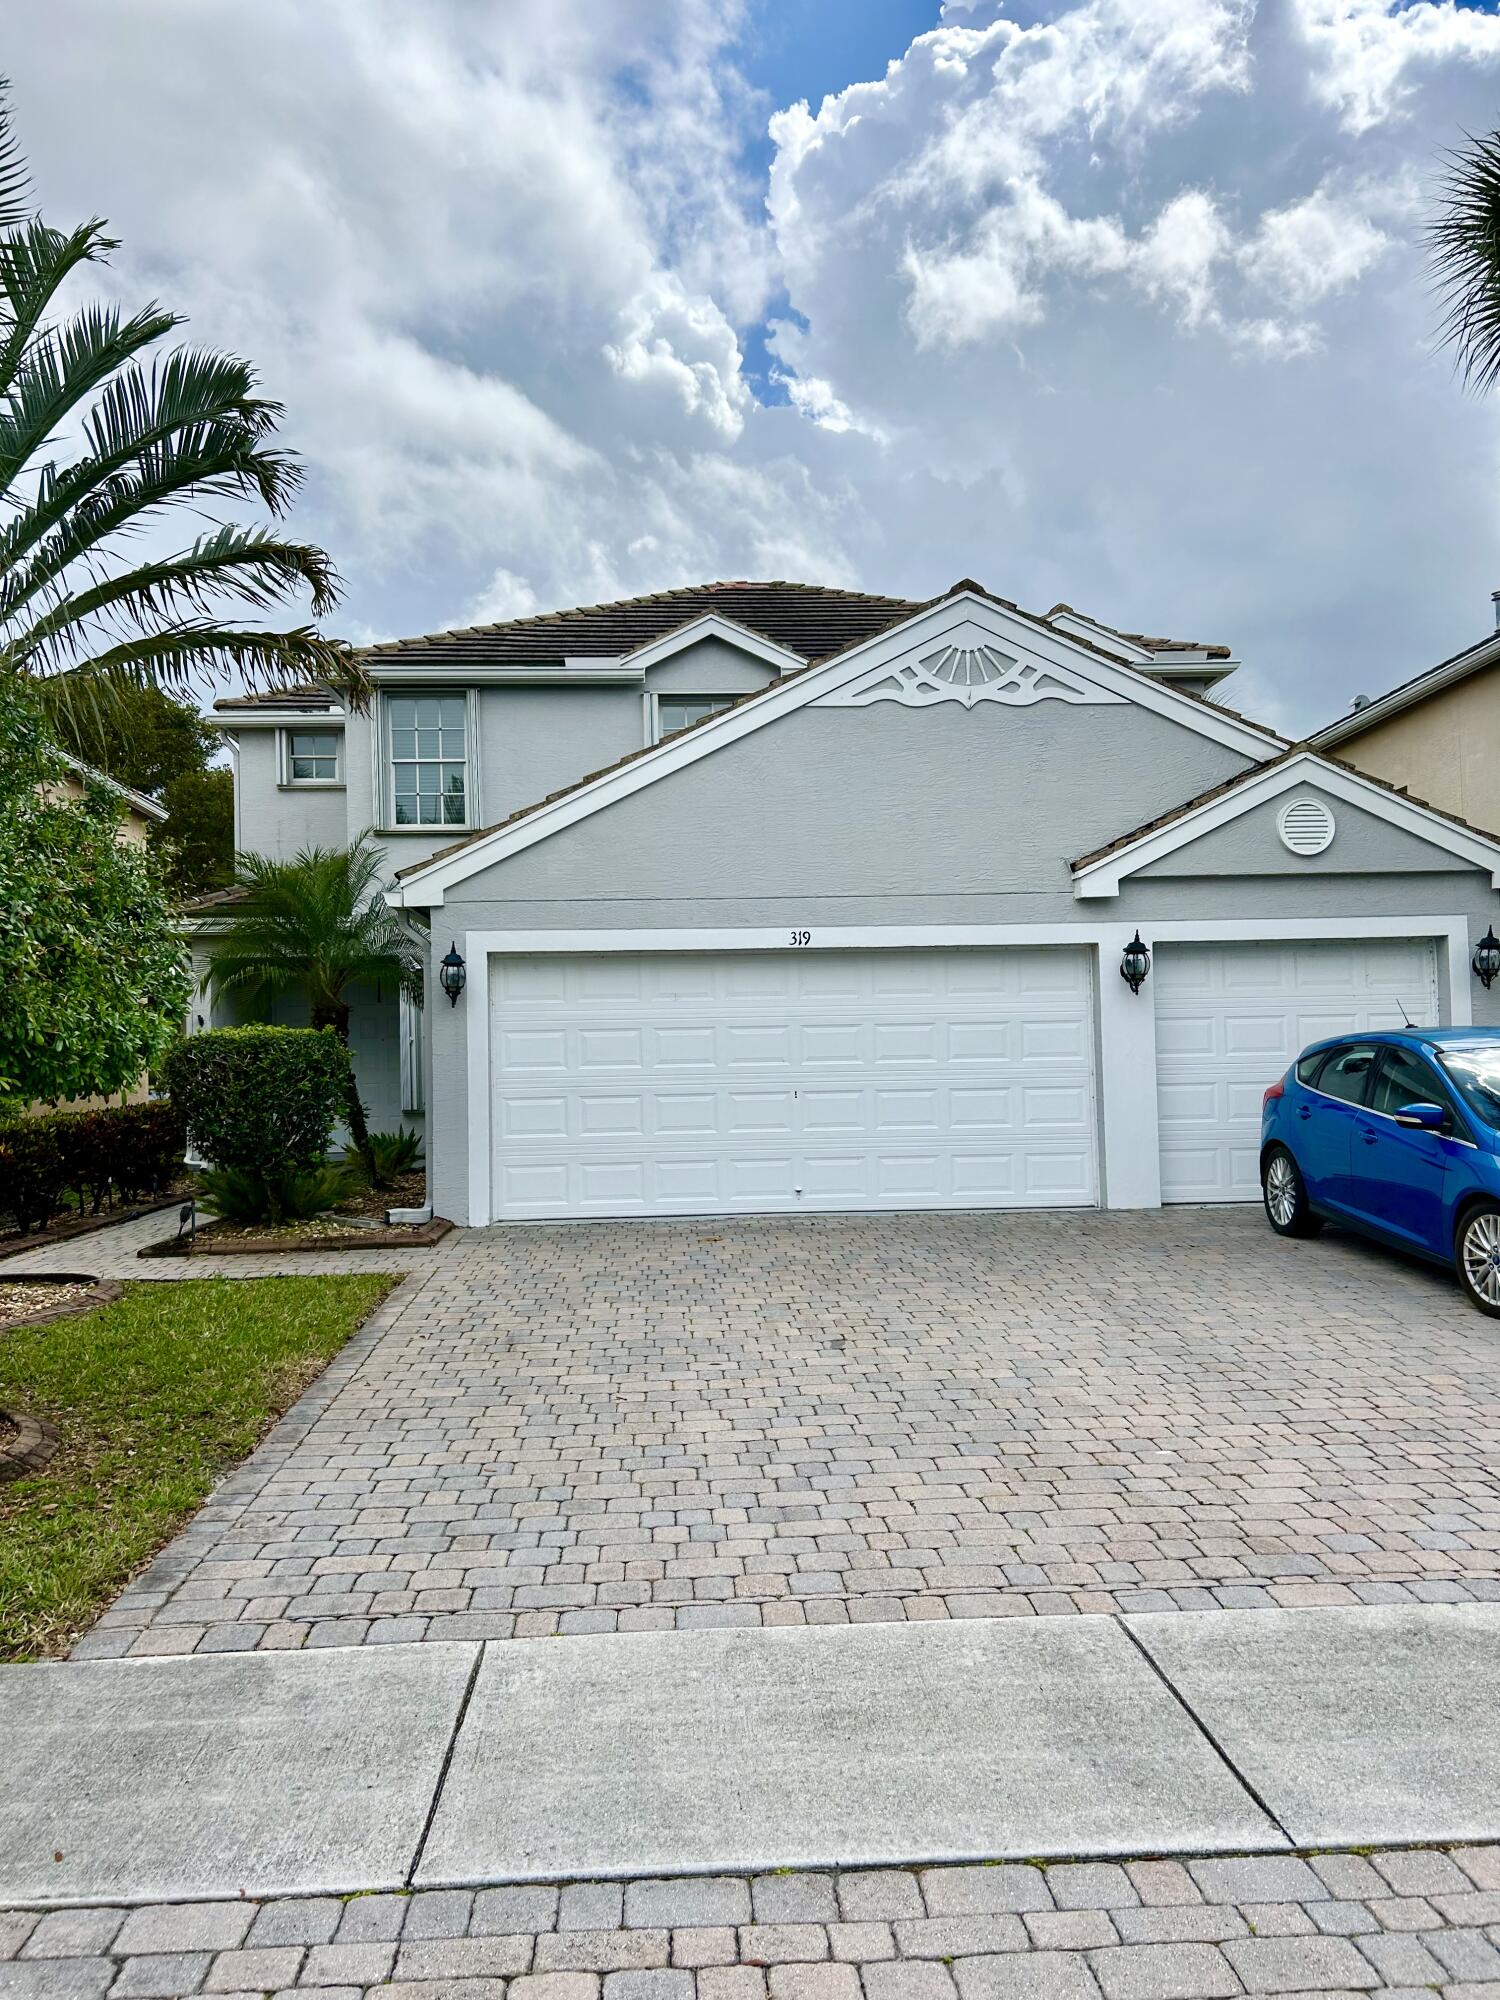 Property for Sale at 319 Berenger Walk, Royal Palm Beach, Palm Beach County, Florida - Bedrooms: 5 
Bathrooms: 3  - $655,000